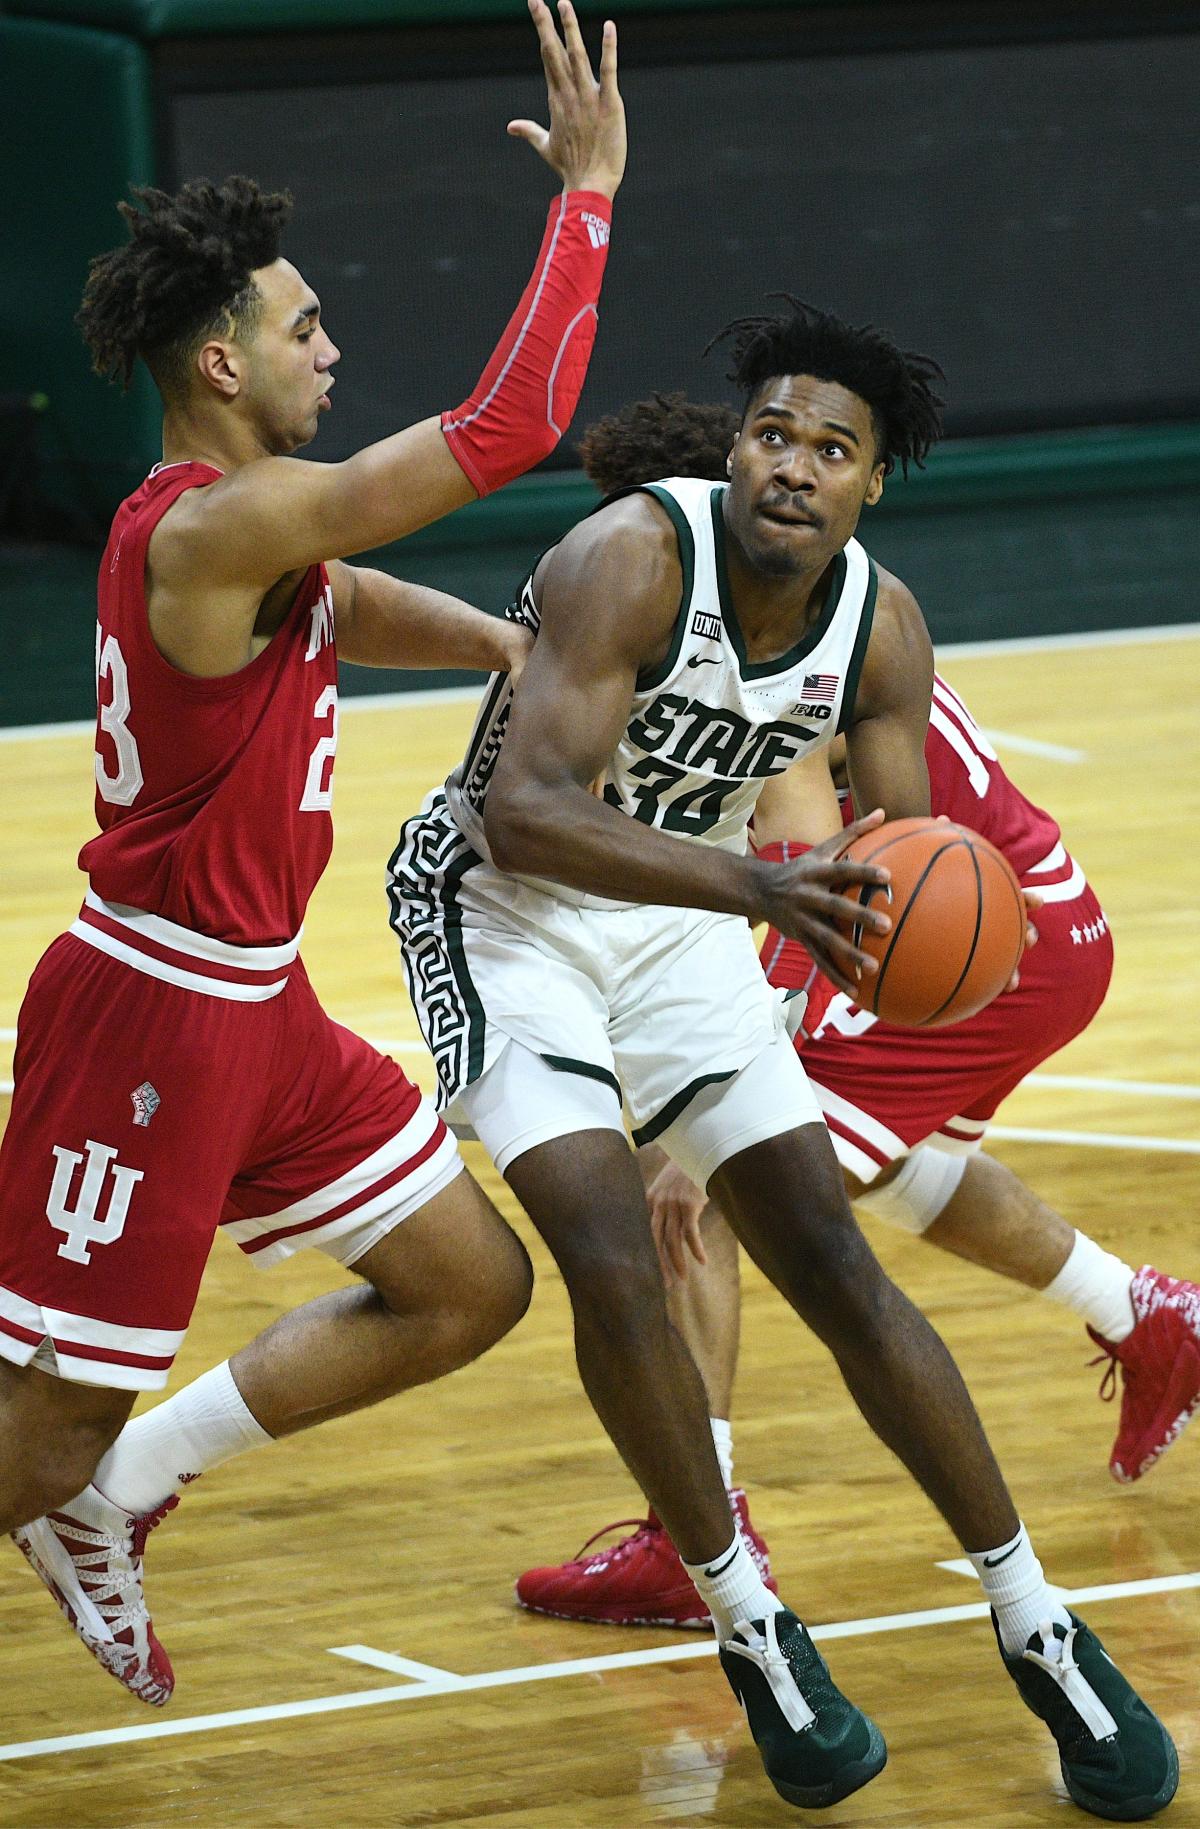 How to watch Michigan State vs. Indiana basketball on TV, live stream